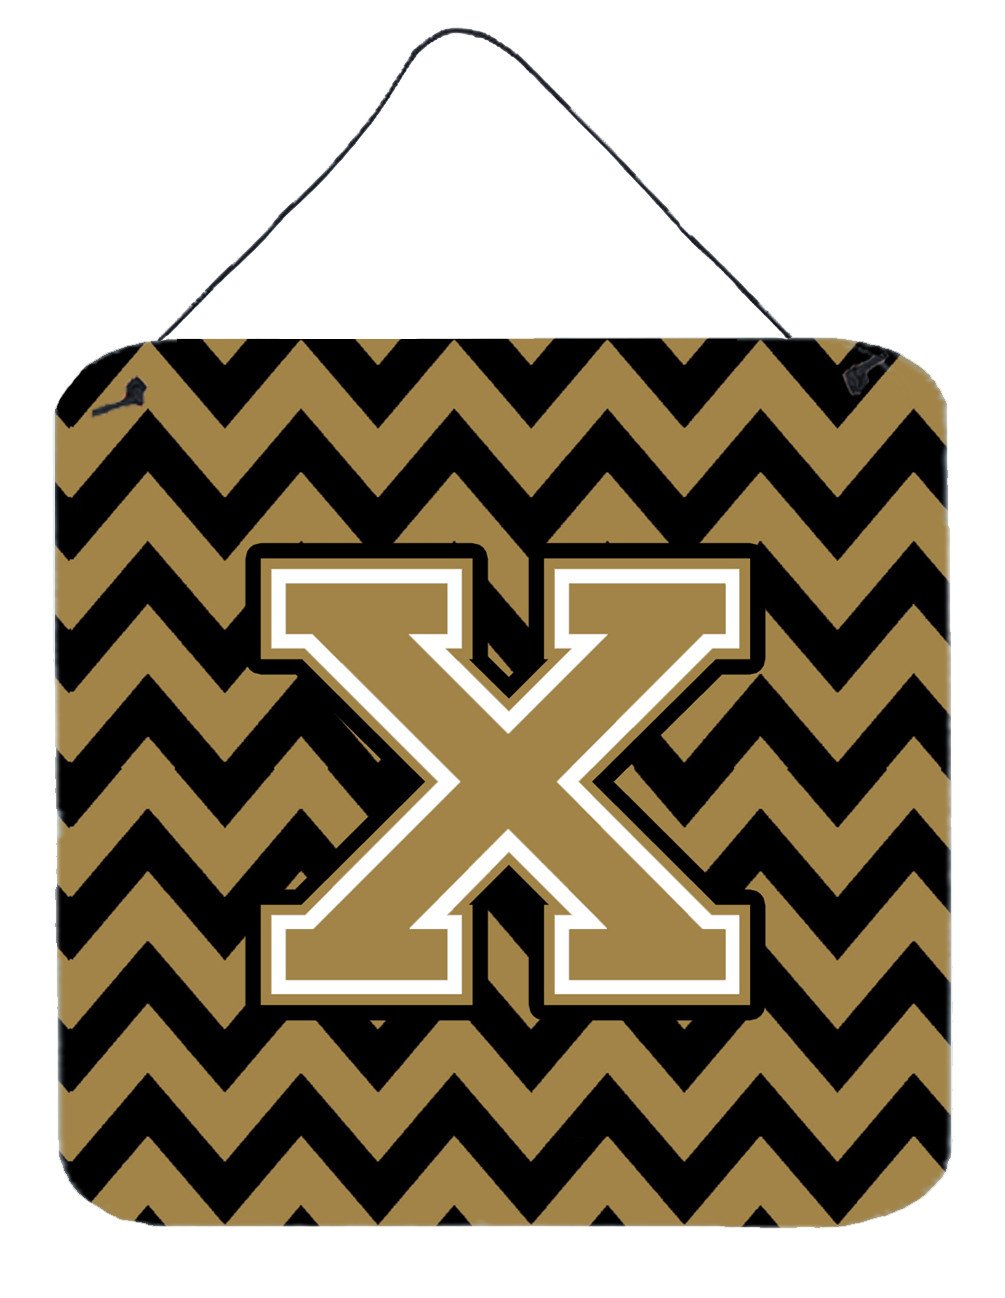 Letter X Chevron Black and Gold  Wall or Door Hanging Prints CJ1050-XDS66 by Caroline's Treasures